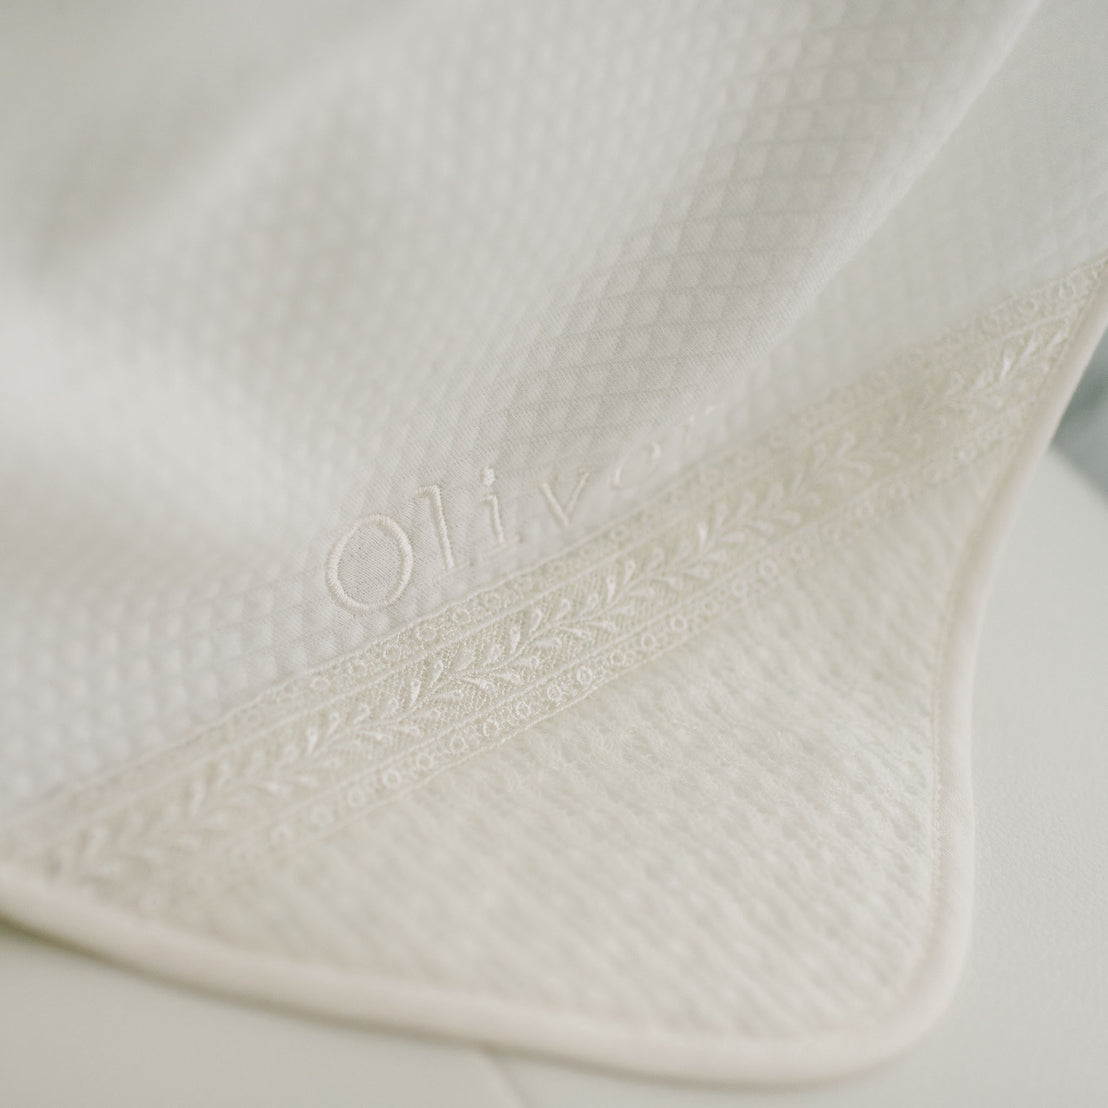 A close-up of the ivory Oliver Personalized Blanket with intricate embroidery at the edge. The handmade blanket, a personalized heirloom, features the name "Oliver" embroidered on it in ivory thread.